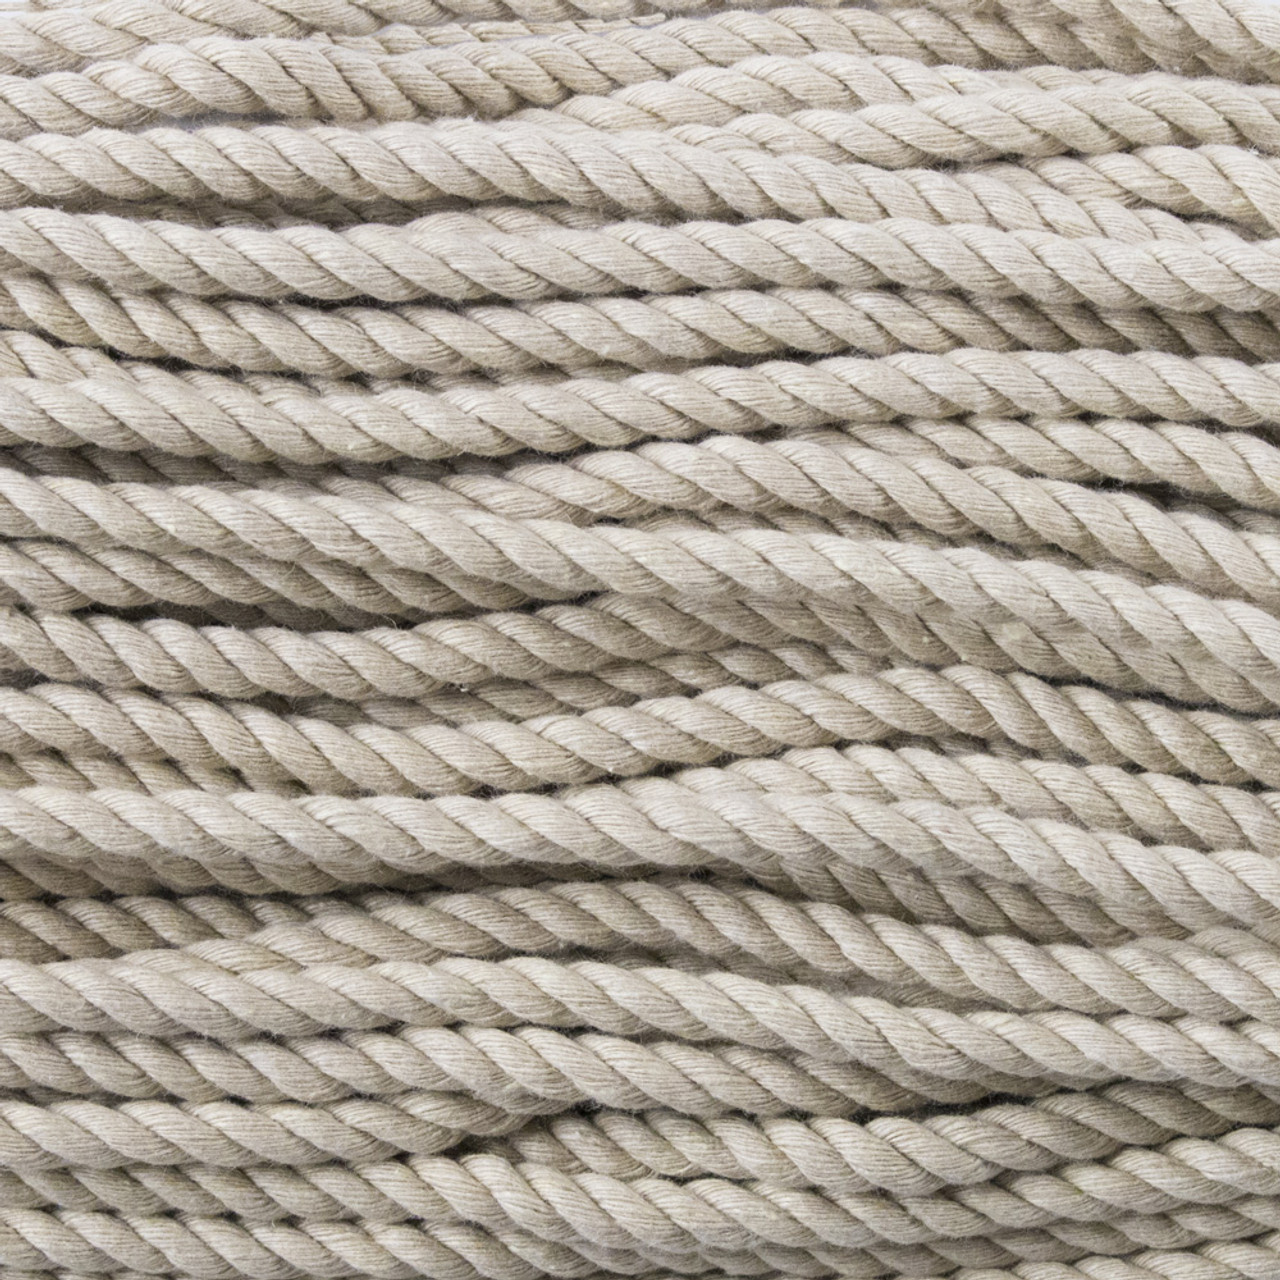 3-Strand Twisted Cotton 1/4 inch Rope - Tan